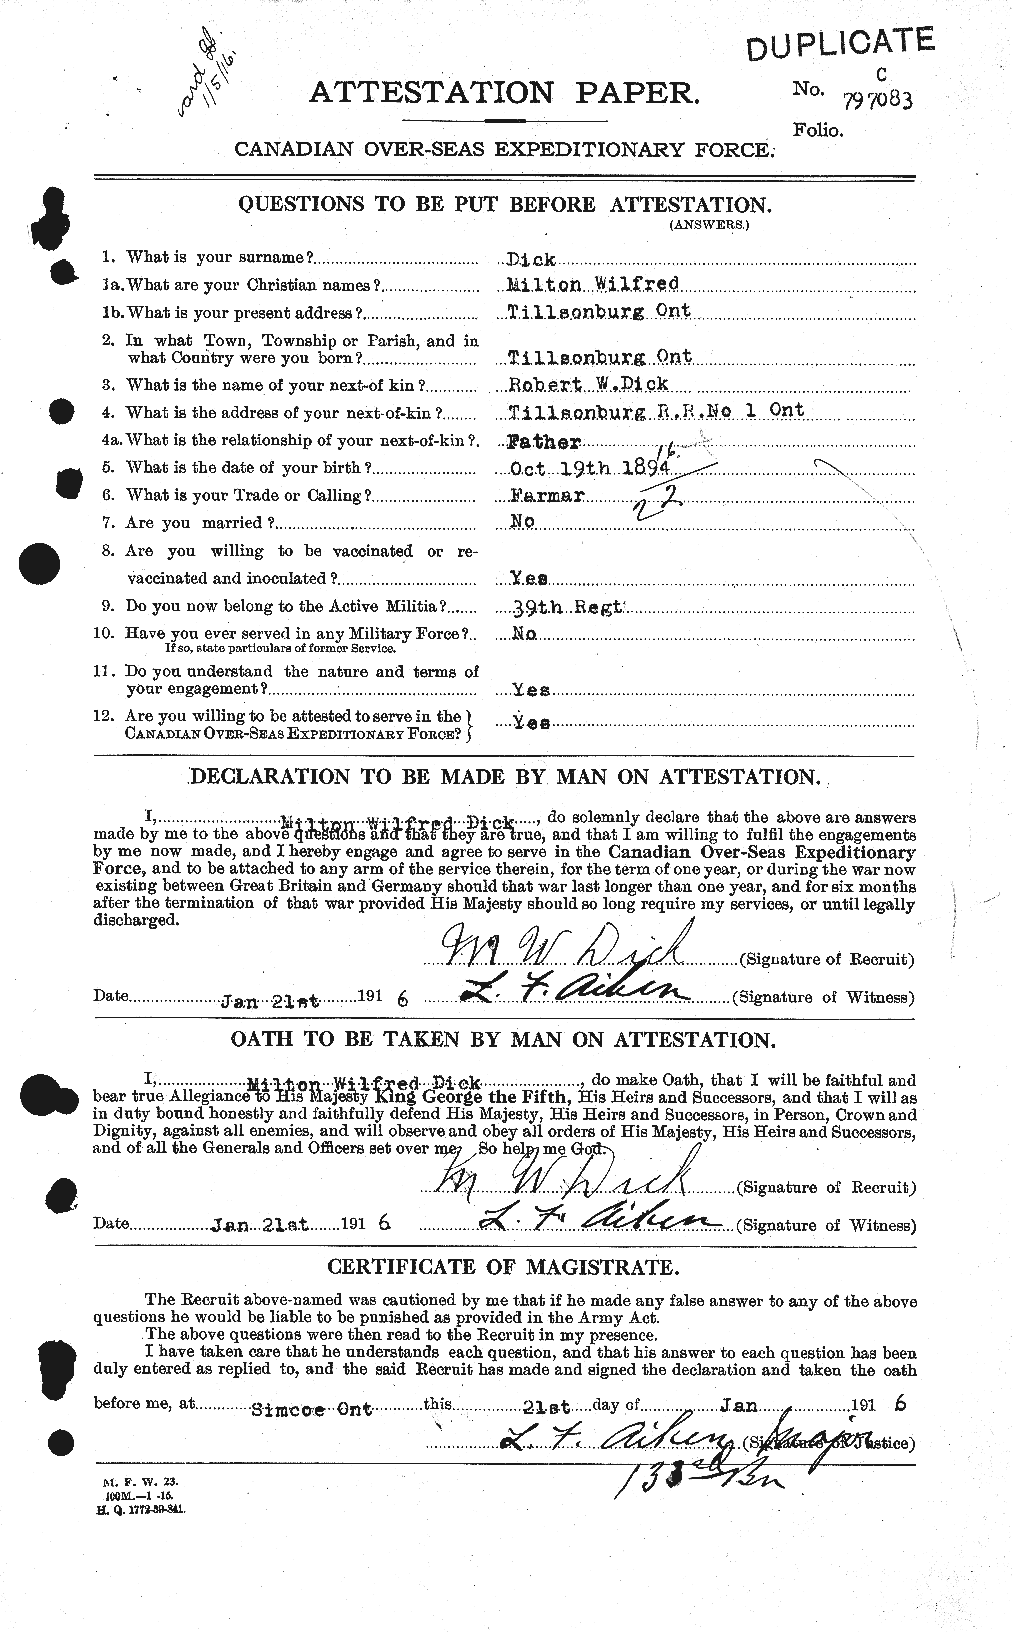 Personnel Records of the First World War - CEF 290536a